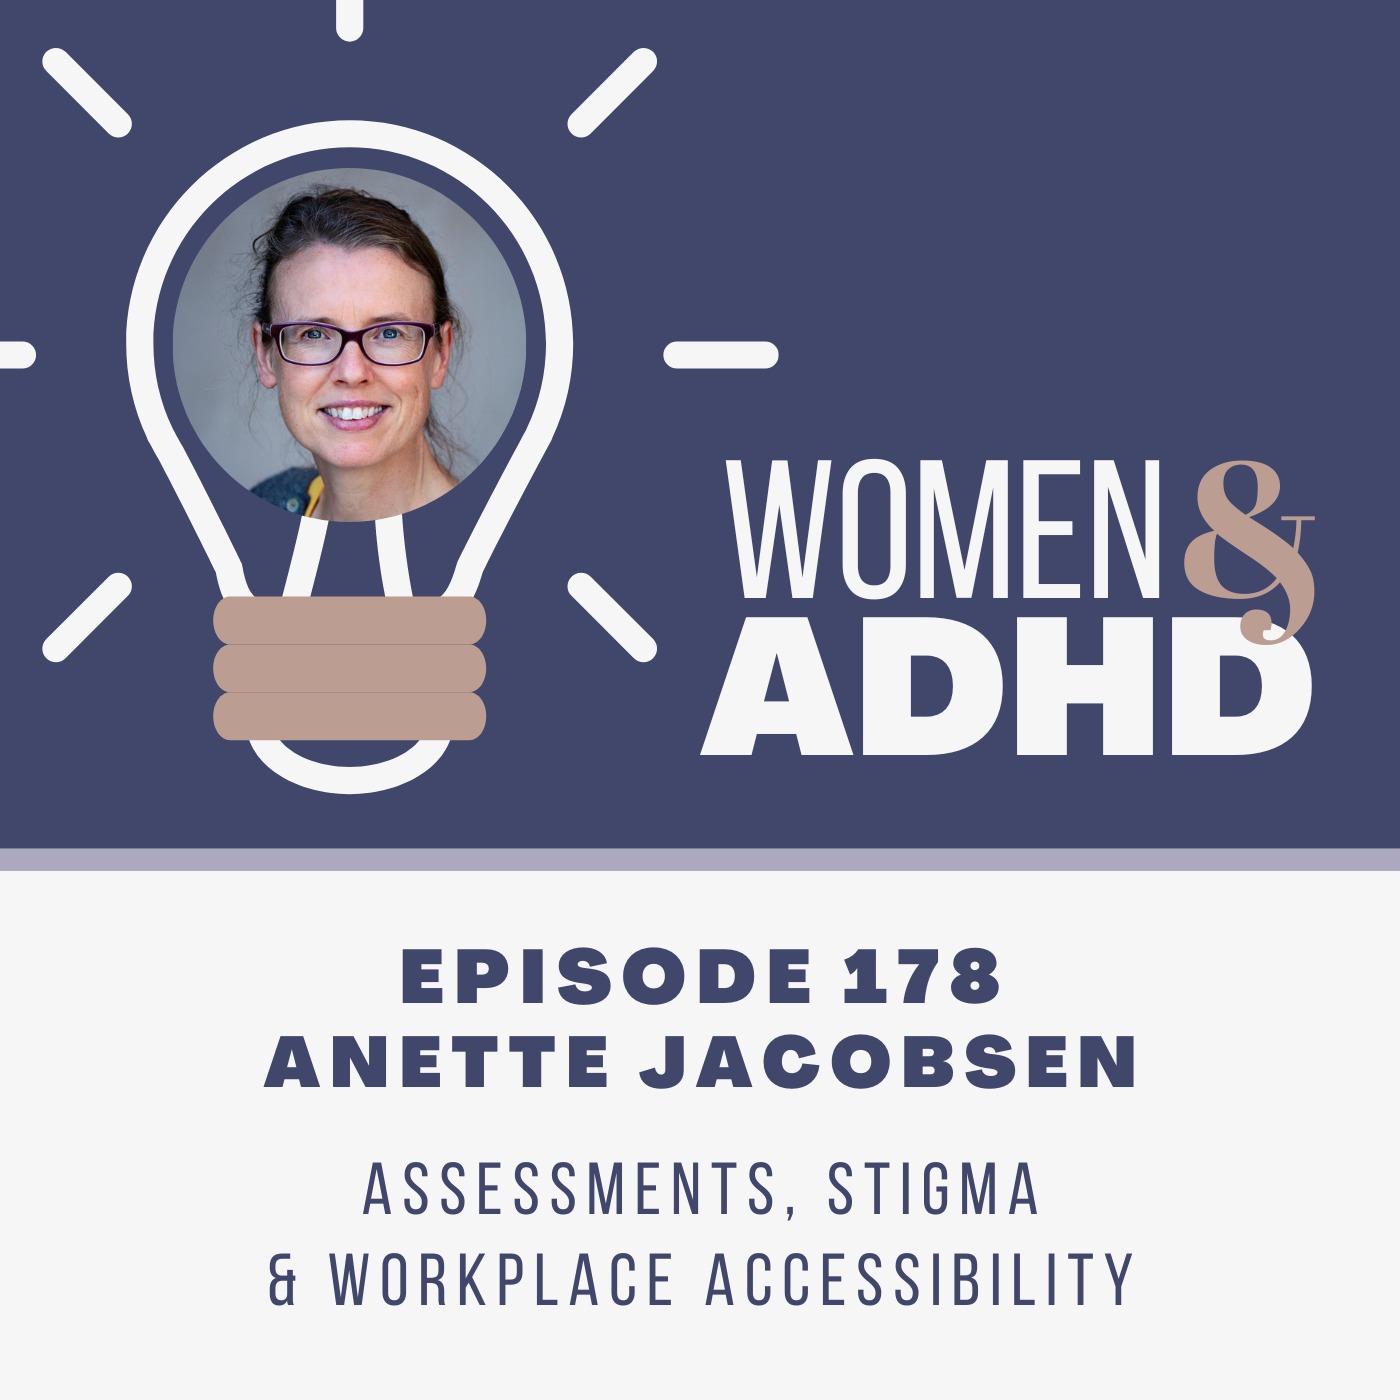 Anette Jacobsen: Assessments, stigma & workplace accessibility